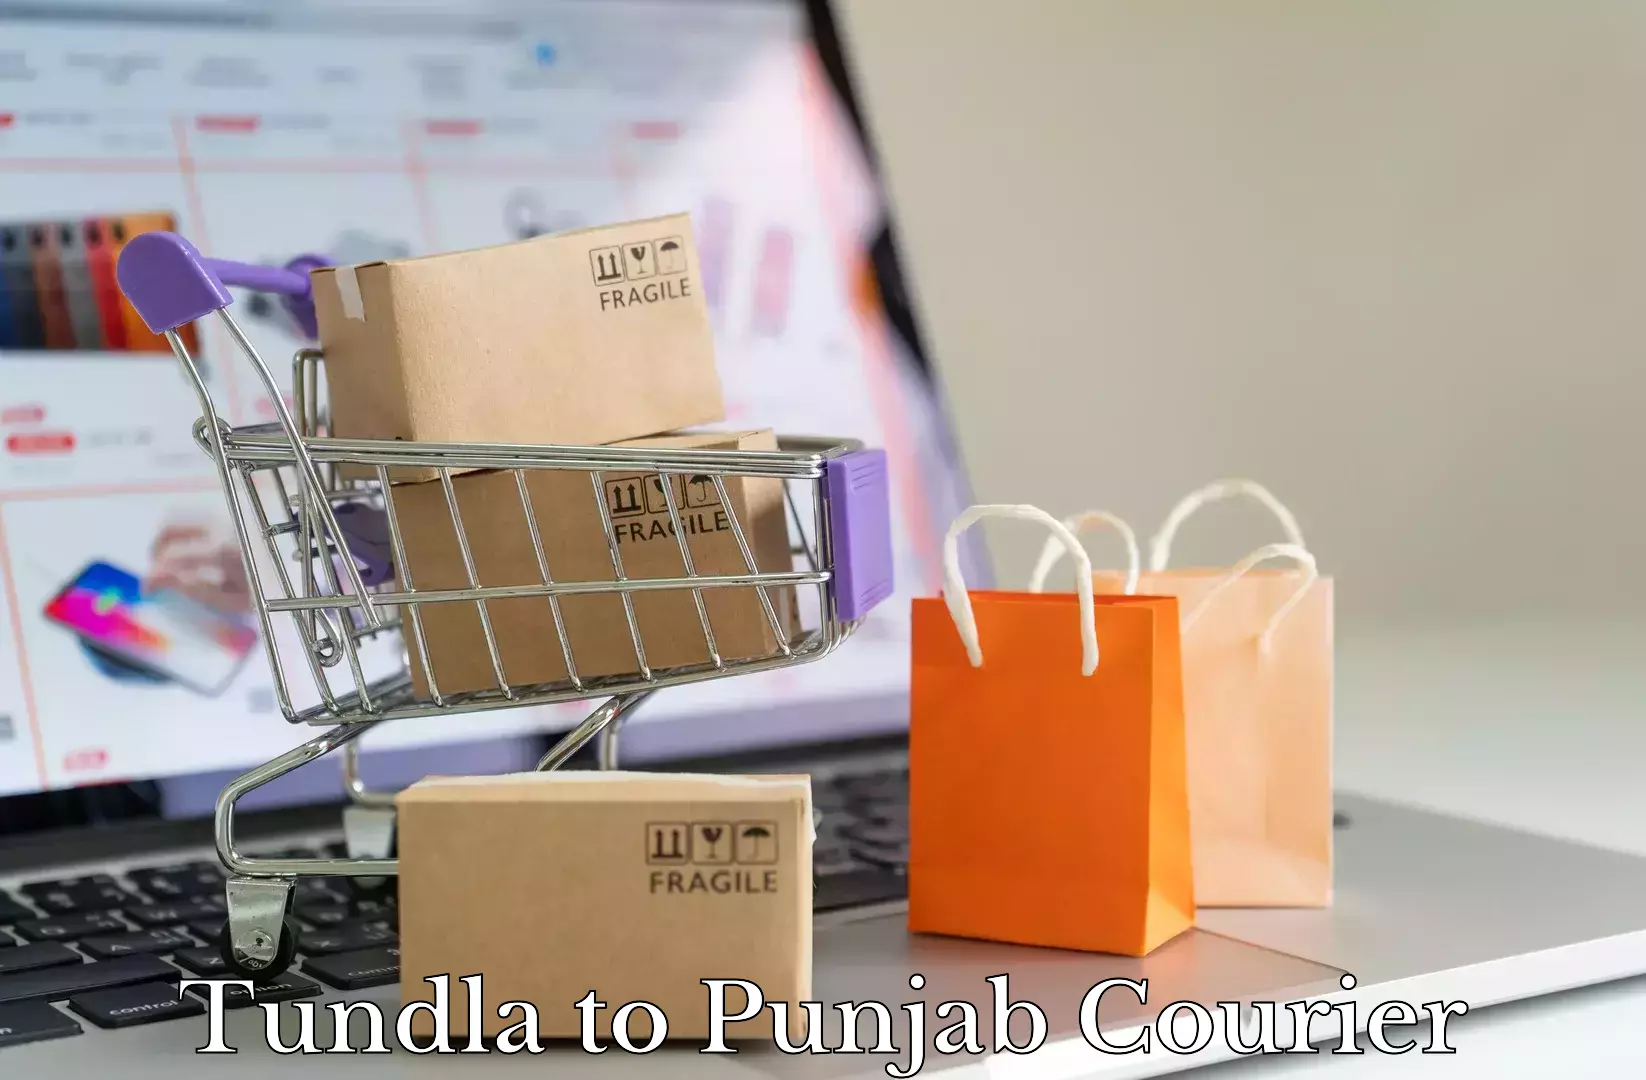 Efficient home movers in Tundla to Punjab